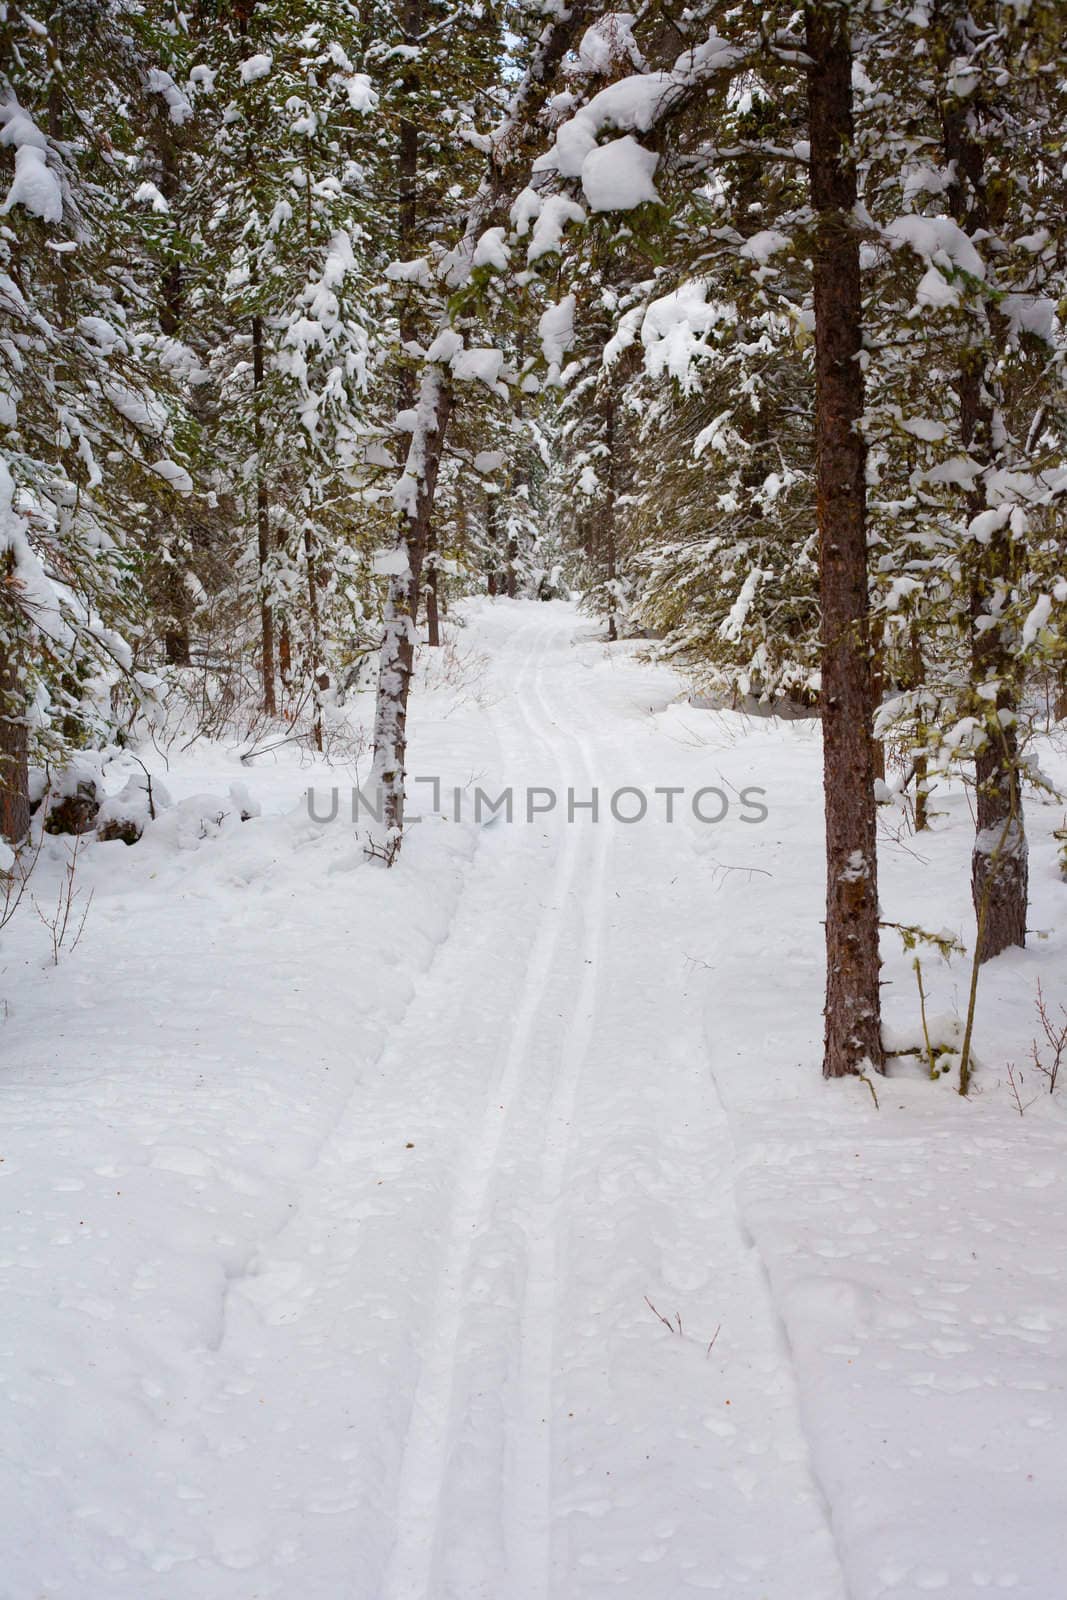 Cross-country ski track in snowy winter forest.